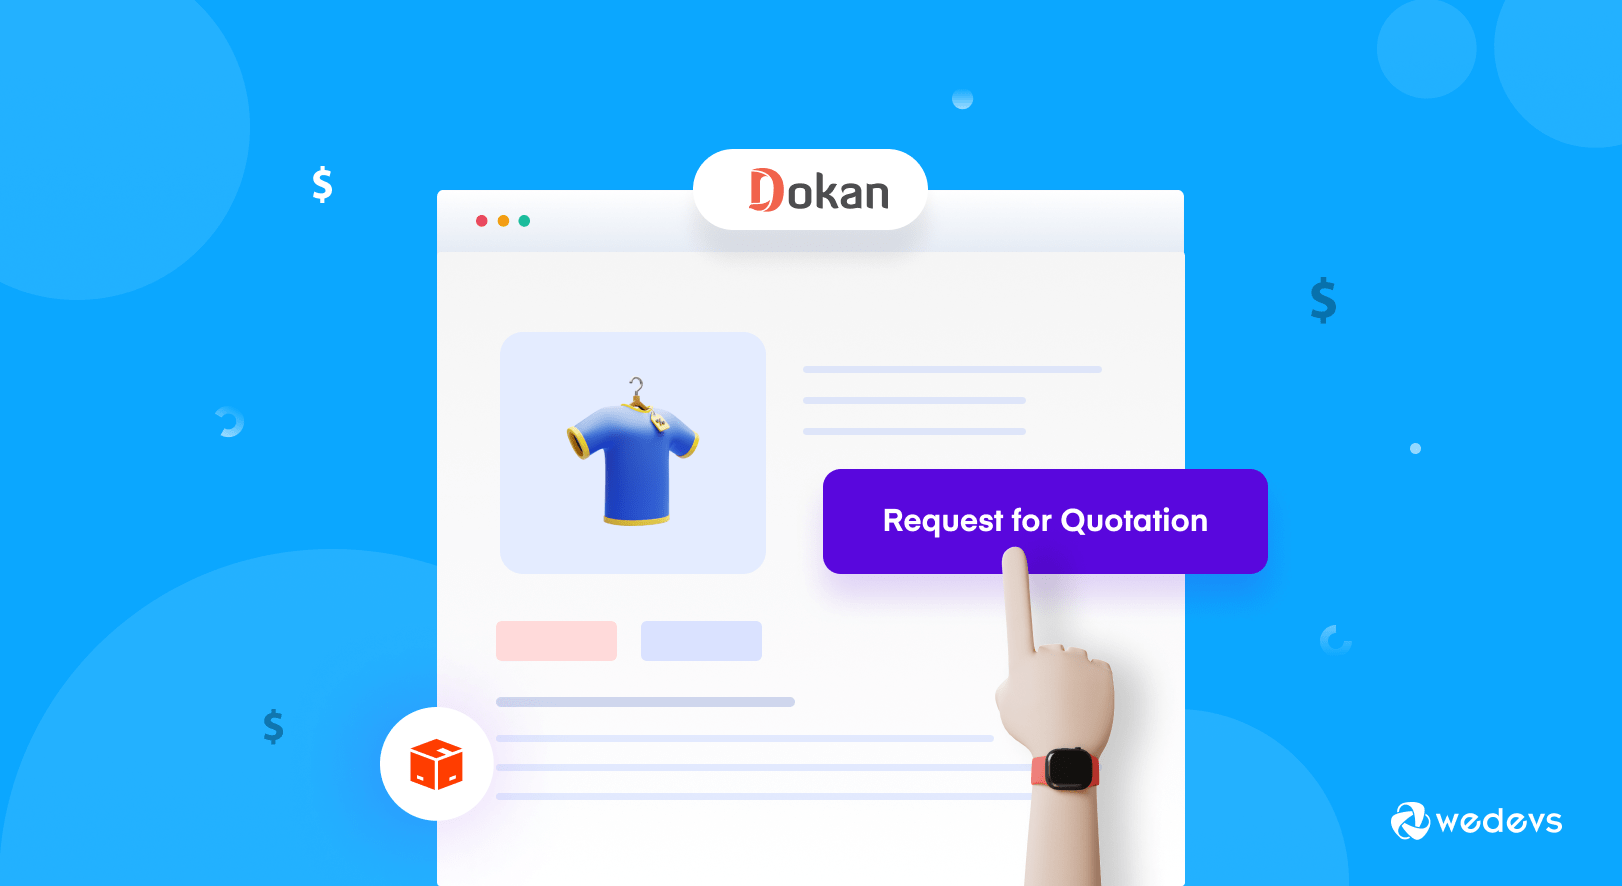 Dokan Request For Quotation Feature: Get to Quote Your Best Price